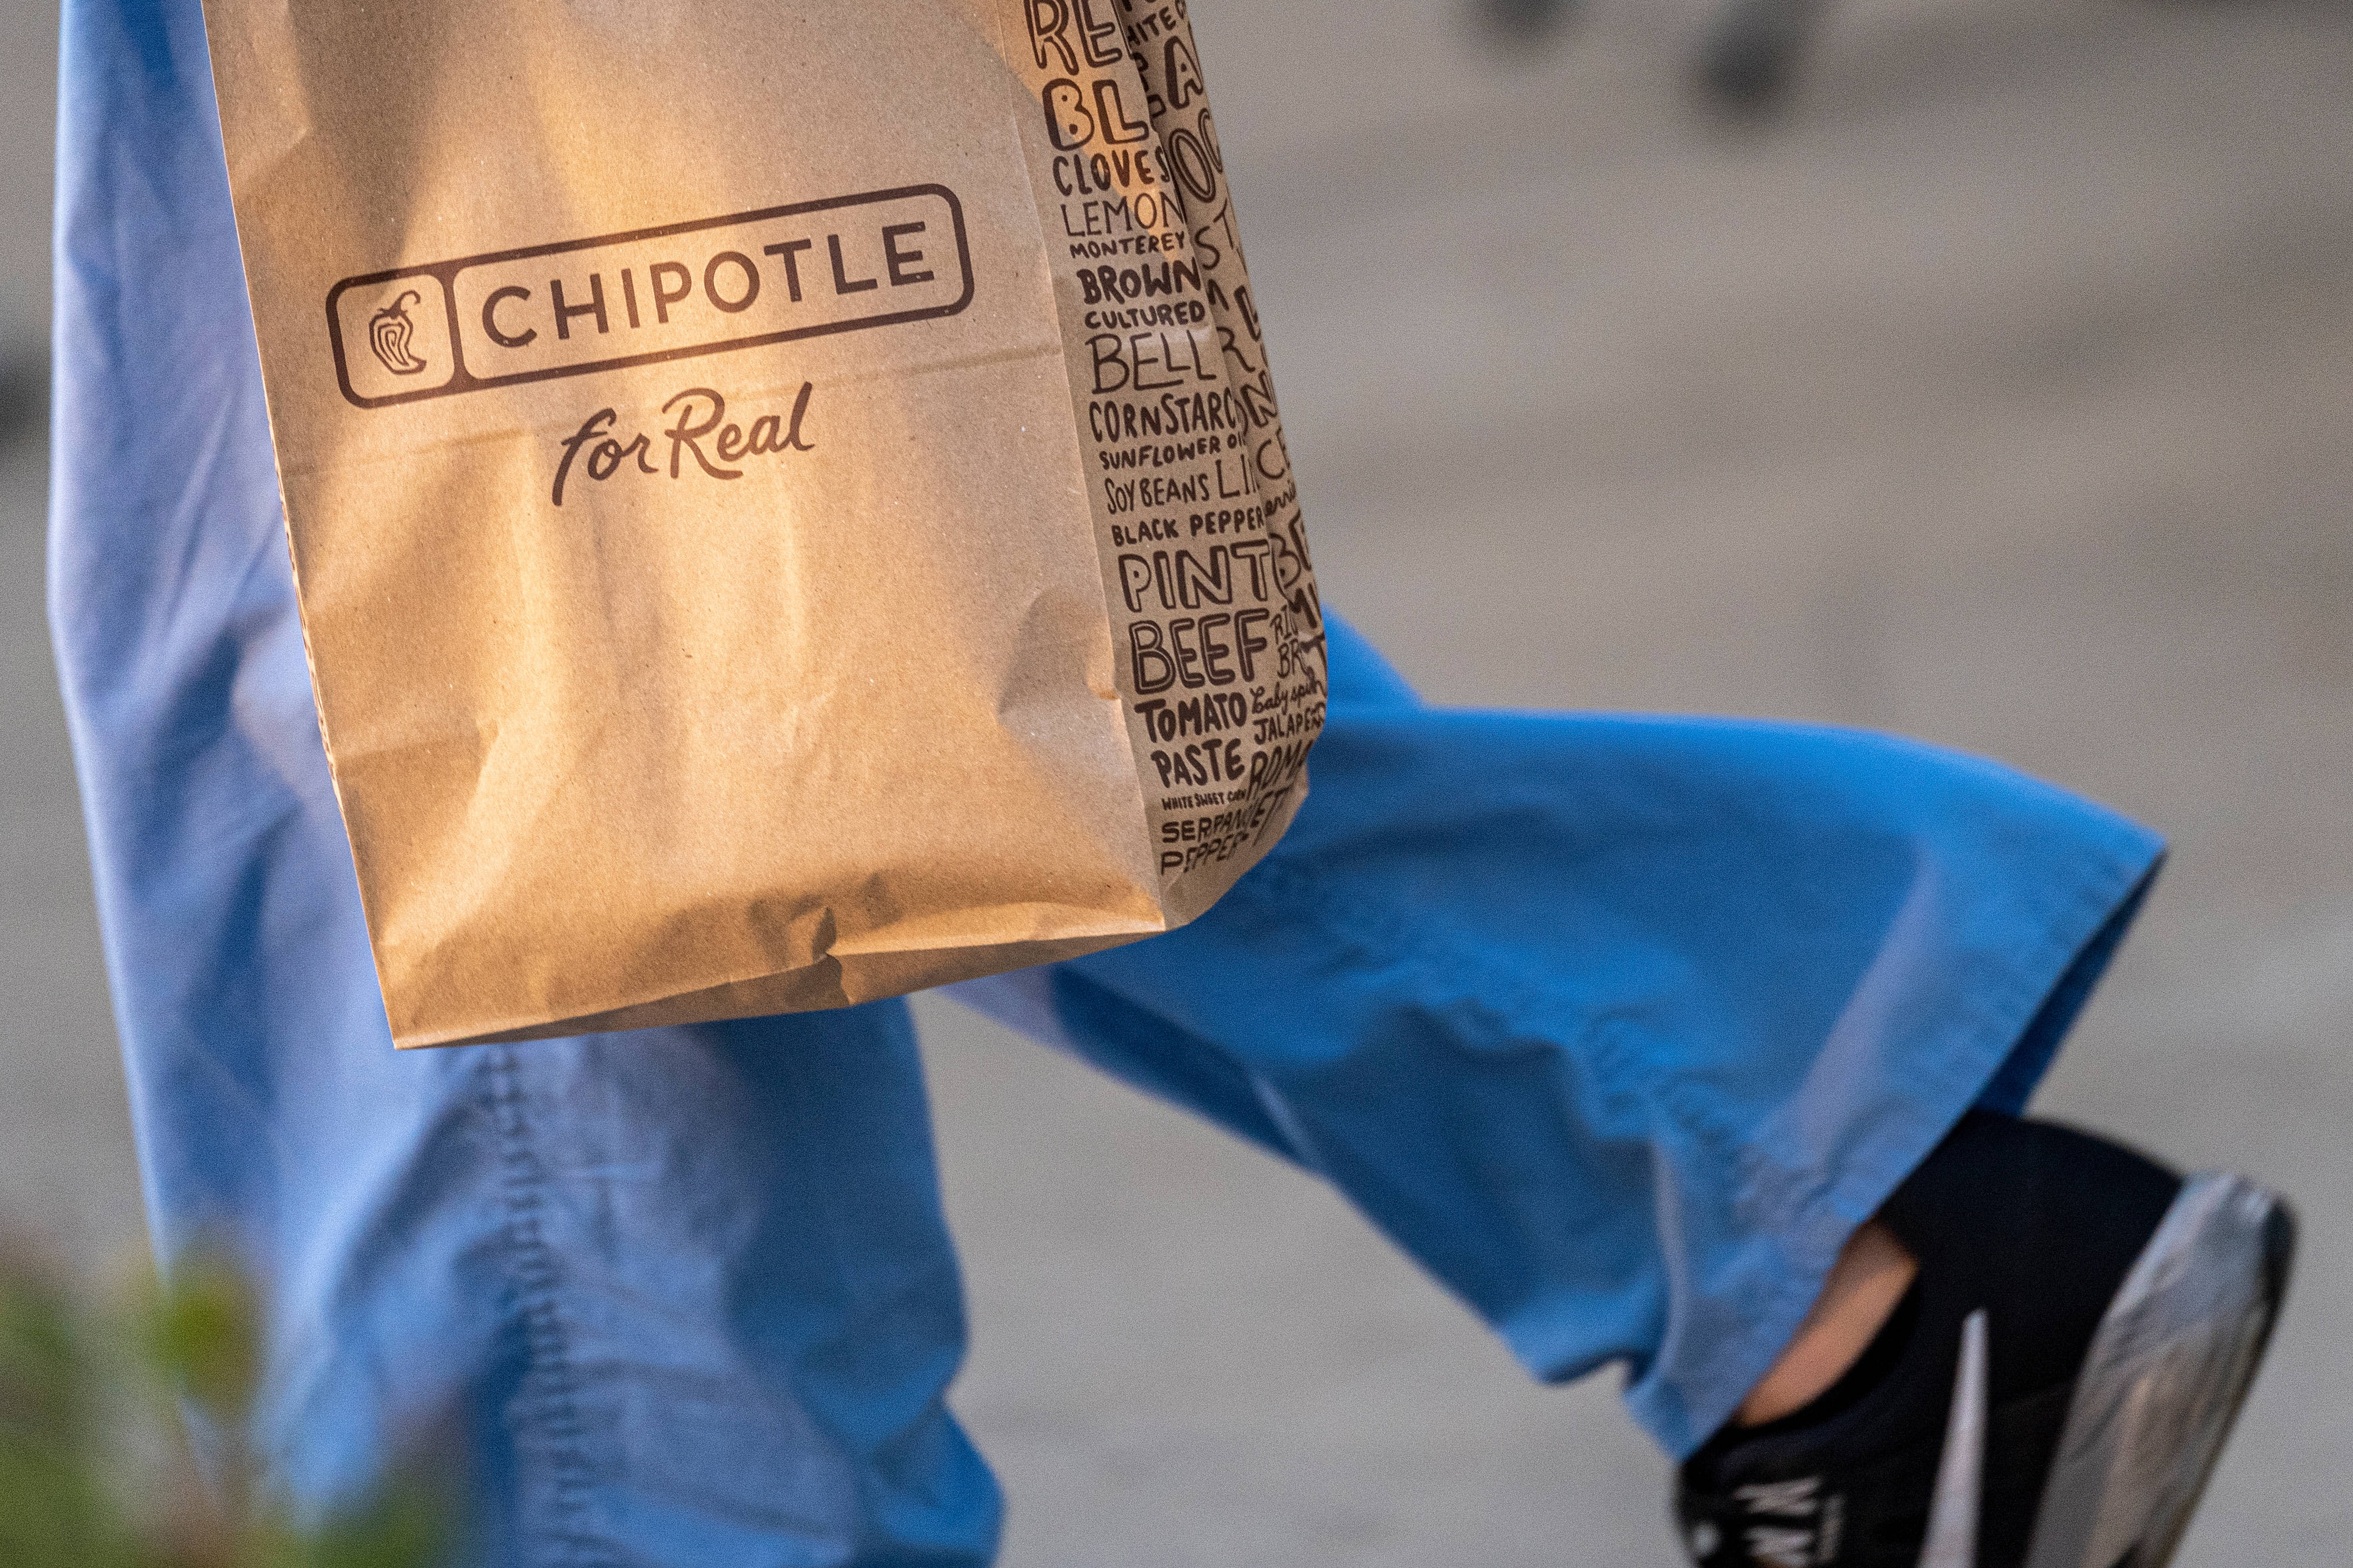 Chipotle shares rise on better-than-expected earnings, CEO says chain is ‘fortunate’ it can raise prices